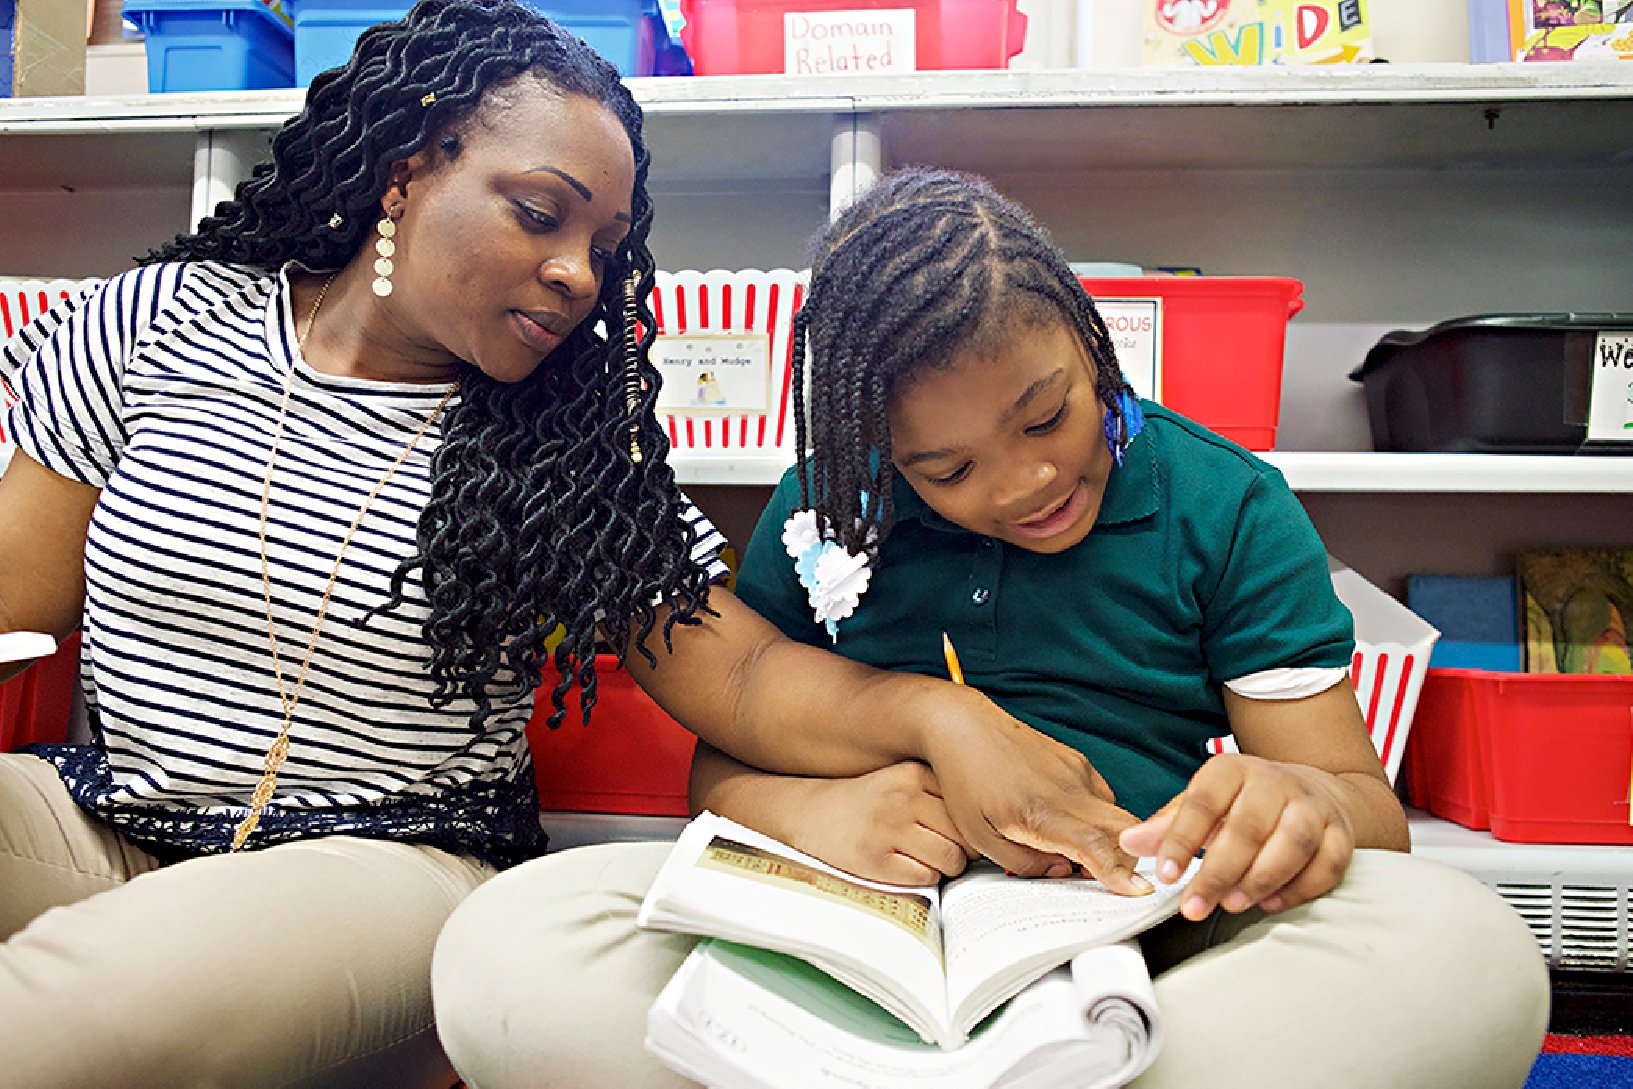 A woman and a young girl reading a book together in a classroom setting, surrounded by science of reading resources.